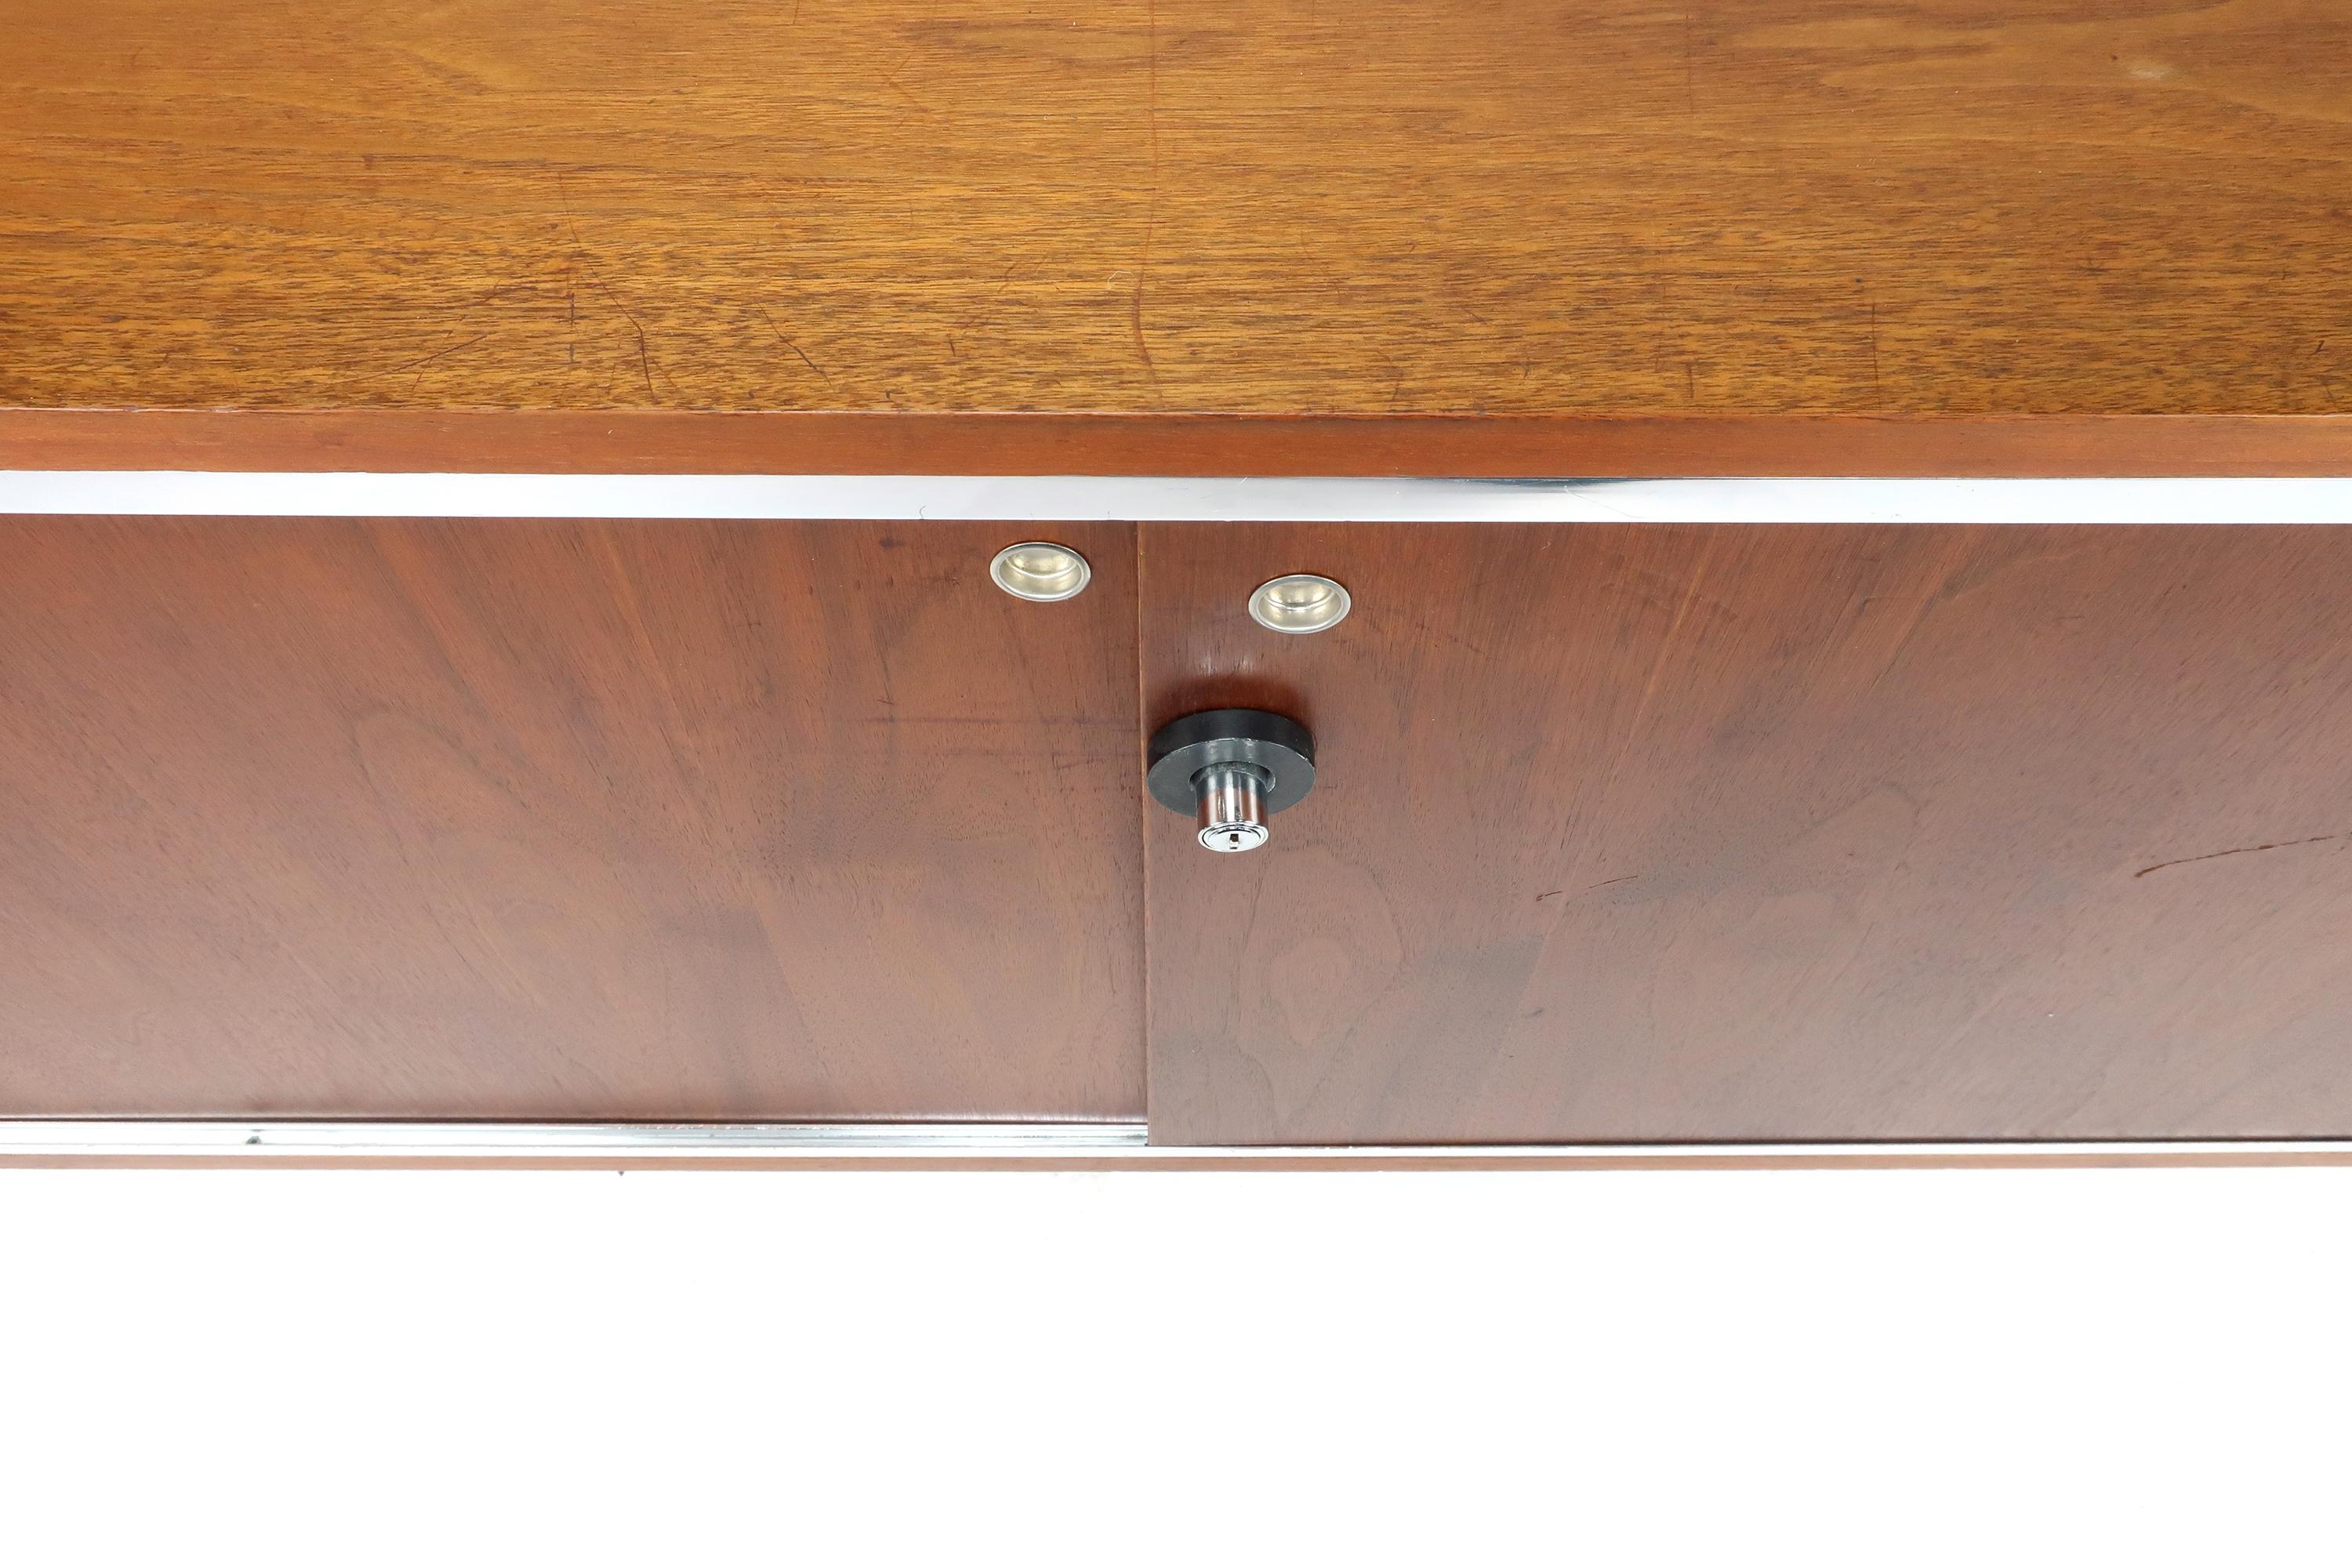 An exceptional Mid-Century Modern George Nelson Executive Office Group credenza for Herman Miller. Walnut case with rich grain and original finish, walnut top, chrome accents and legs, and two walnut veneer sliding doors with chrome pulls.